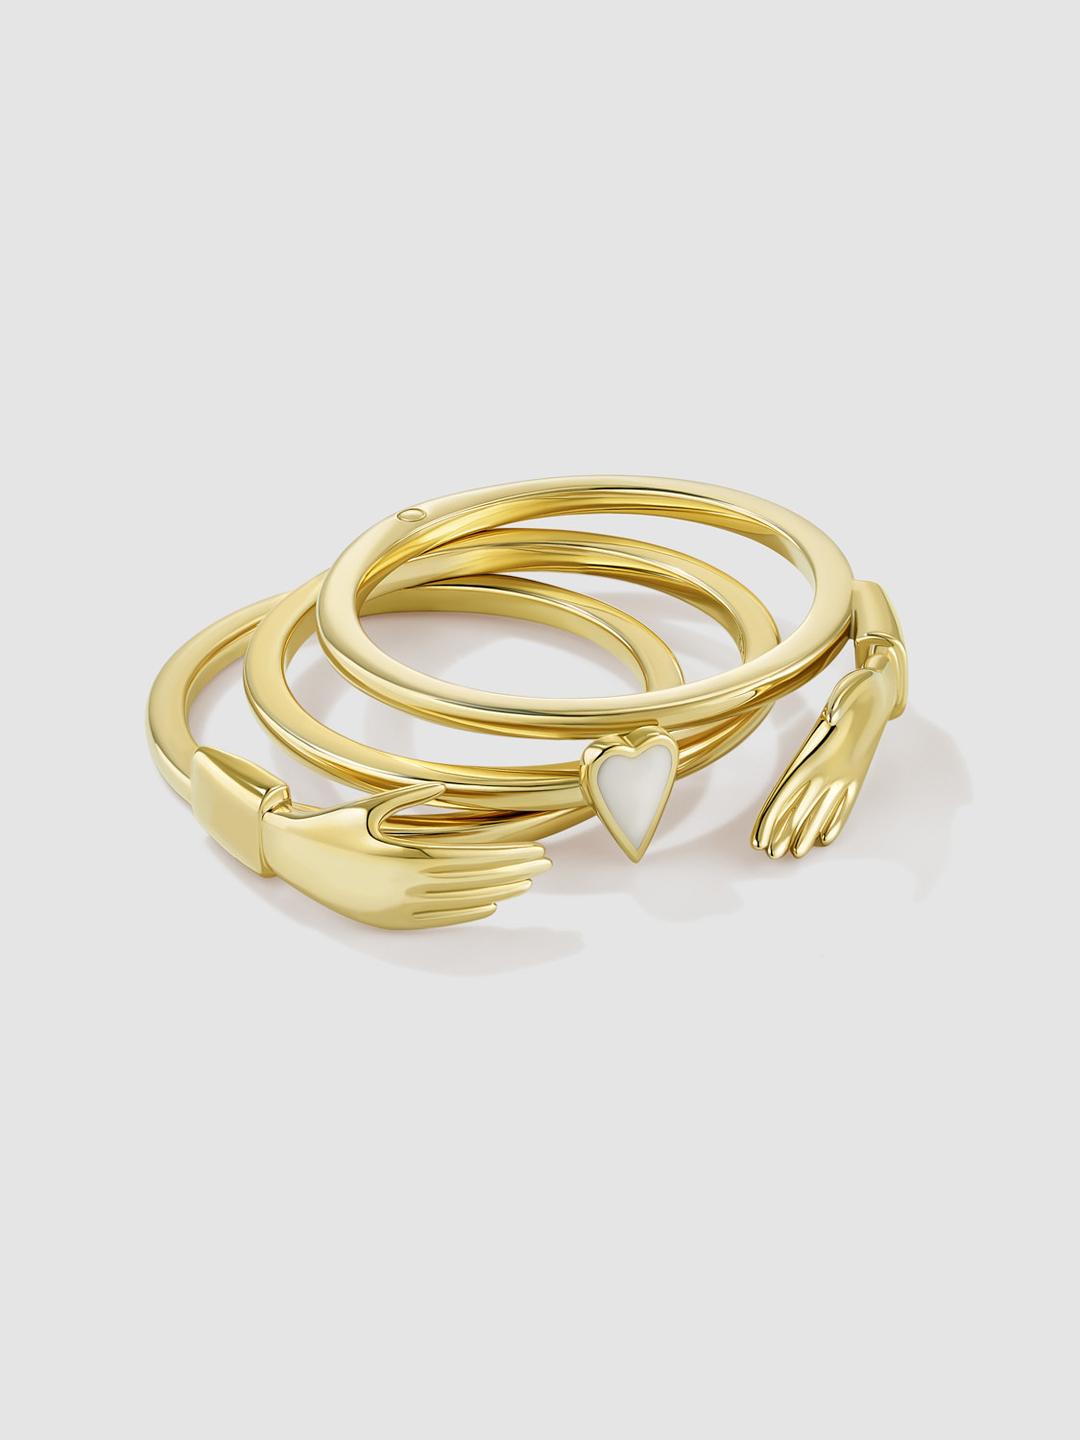 Hand In Hand Ring Yellow Gold